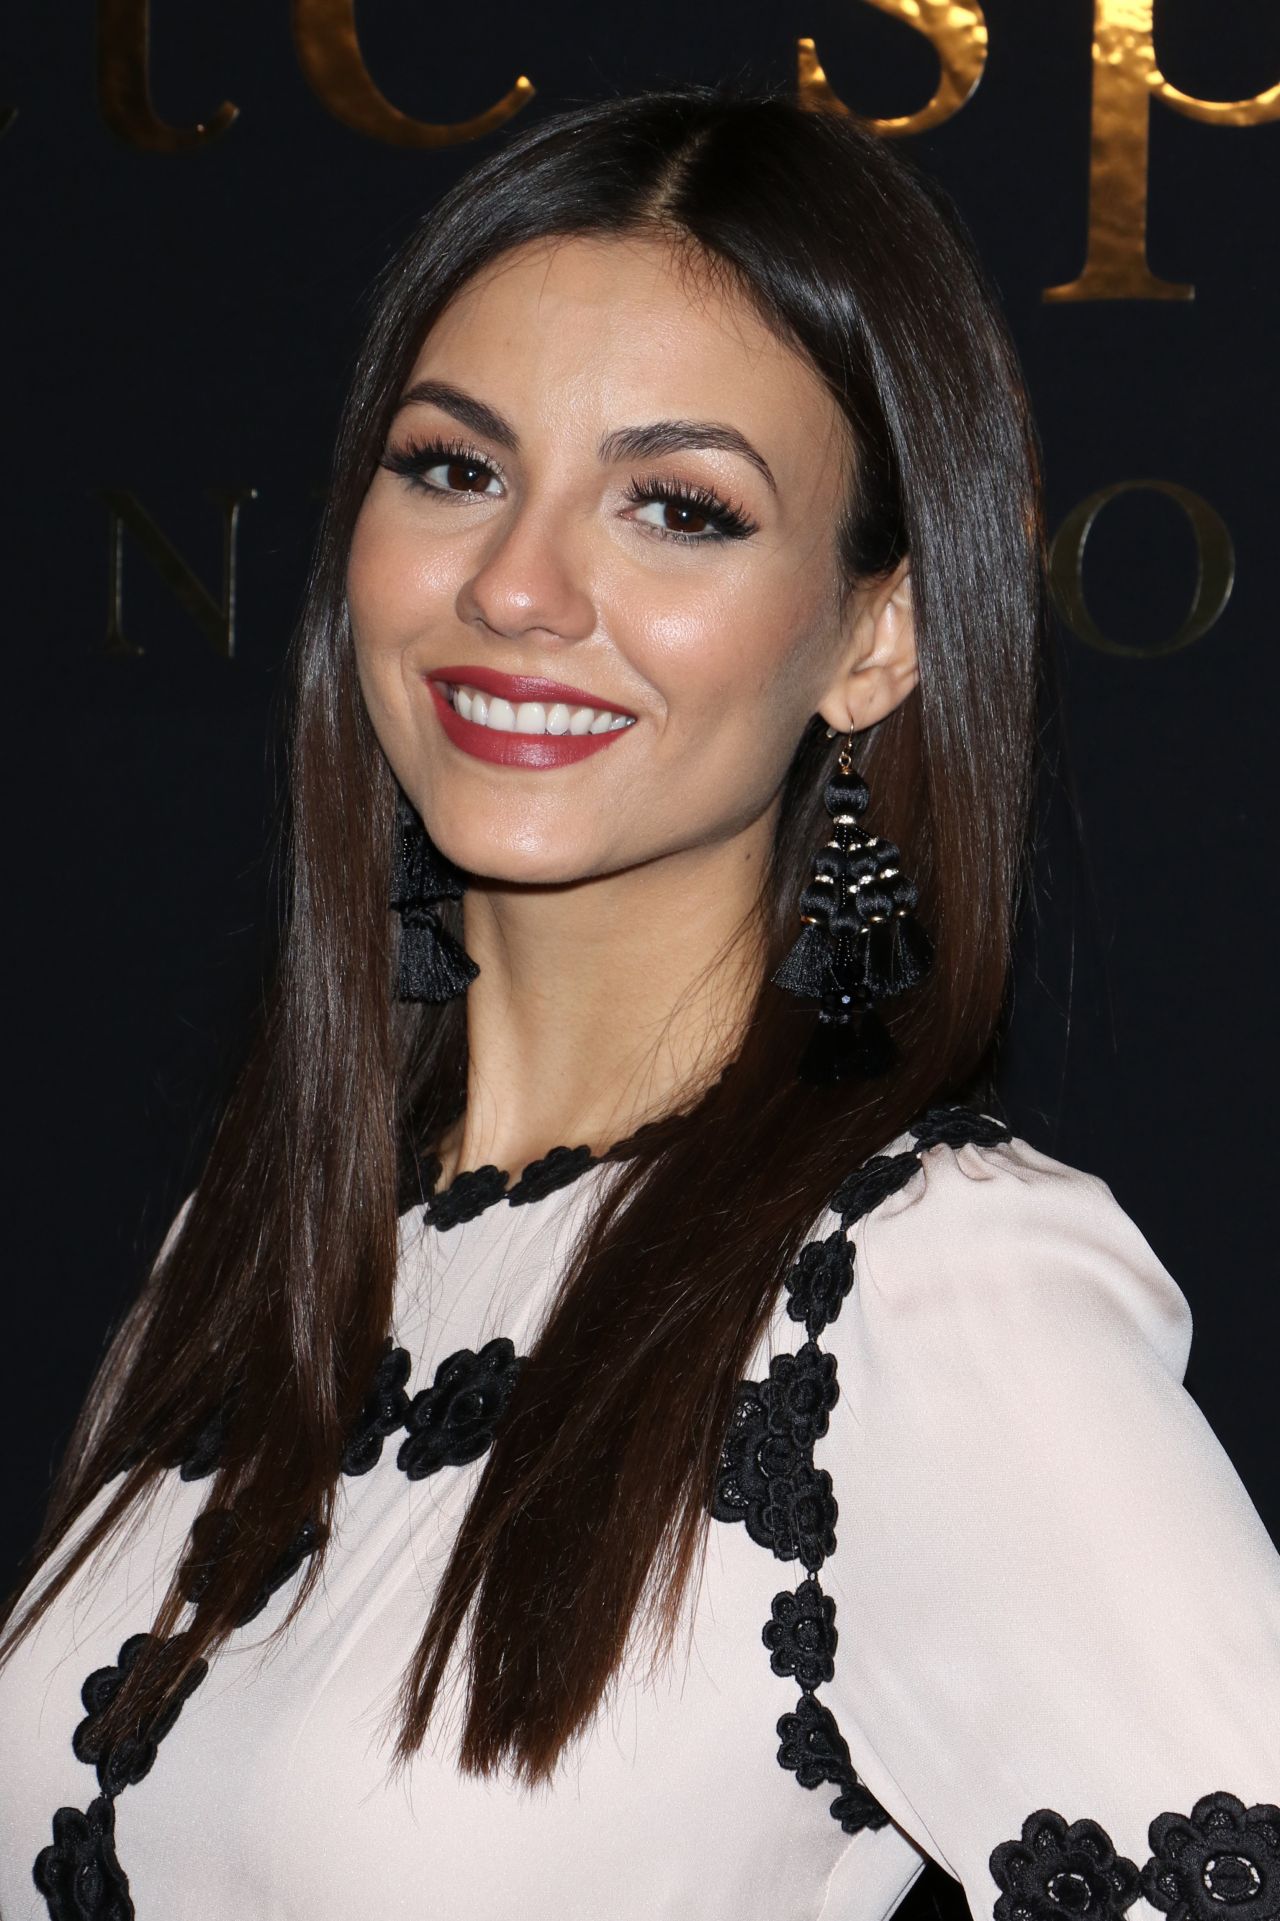 Victoria Justice - Kate Spade Presentation at NYFW in New York 2/10